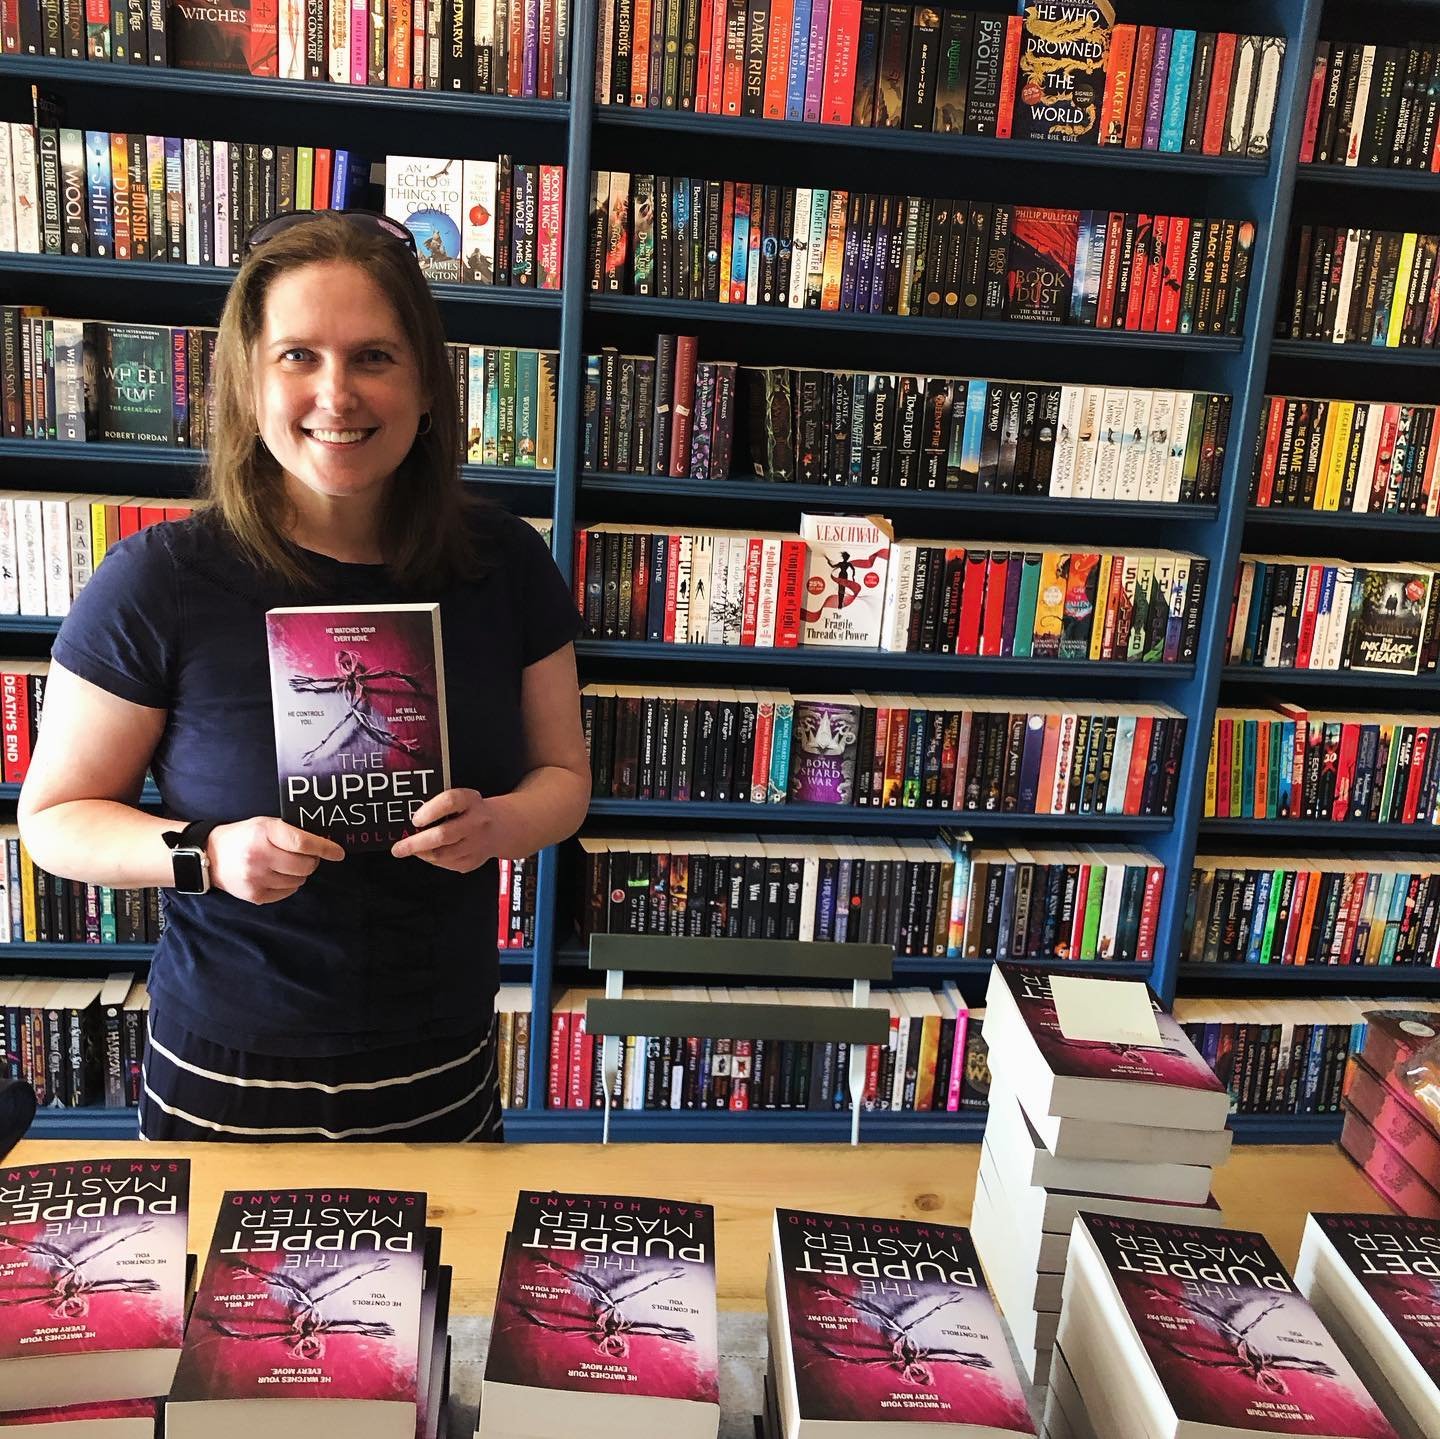 Preorders of #ThePuppetMaster are now signed and ready to go from @imaginarium.books ! (A few extras available if you fancy one&hellip;)
Thank you so much to Robyn and the team for organising.